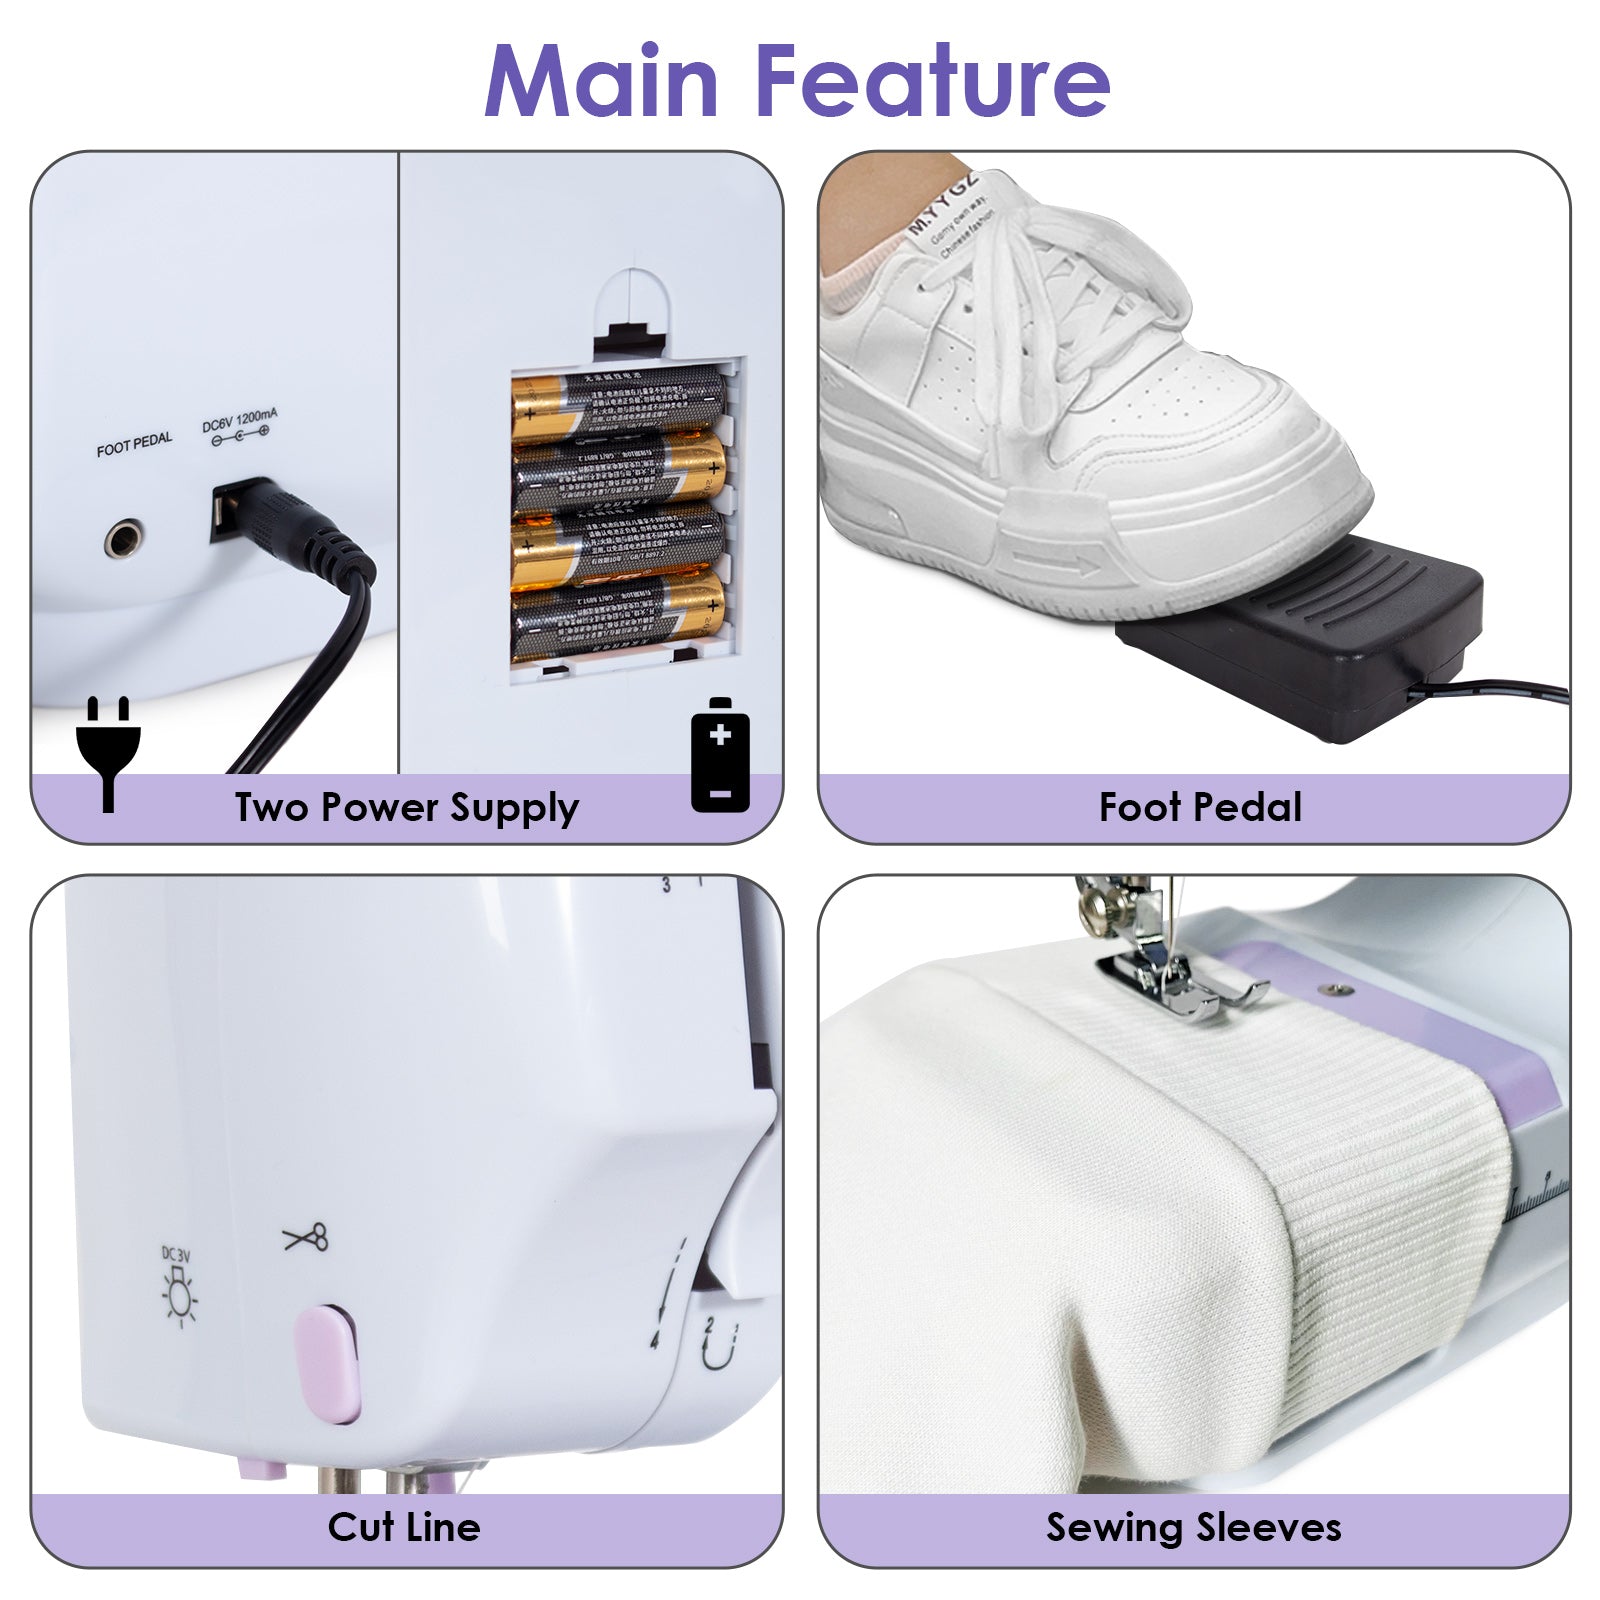 Todeco-Electric-Sewing-Machine-Beginner-Sewing-Machine-with-12-Sewing-Programs-with-Sewing-Kit-and-Pedals-for-Beginners-Parents-and-Children-Purple-Electric-Sewing-Machine-Purple